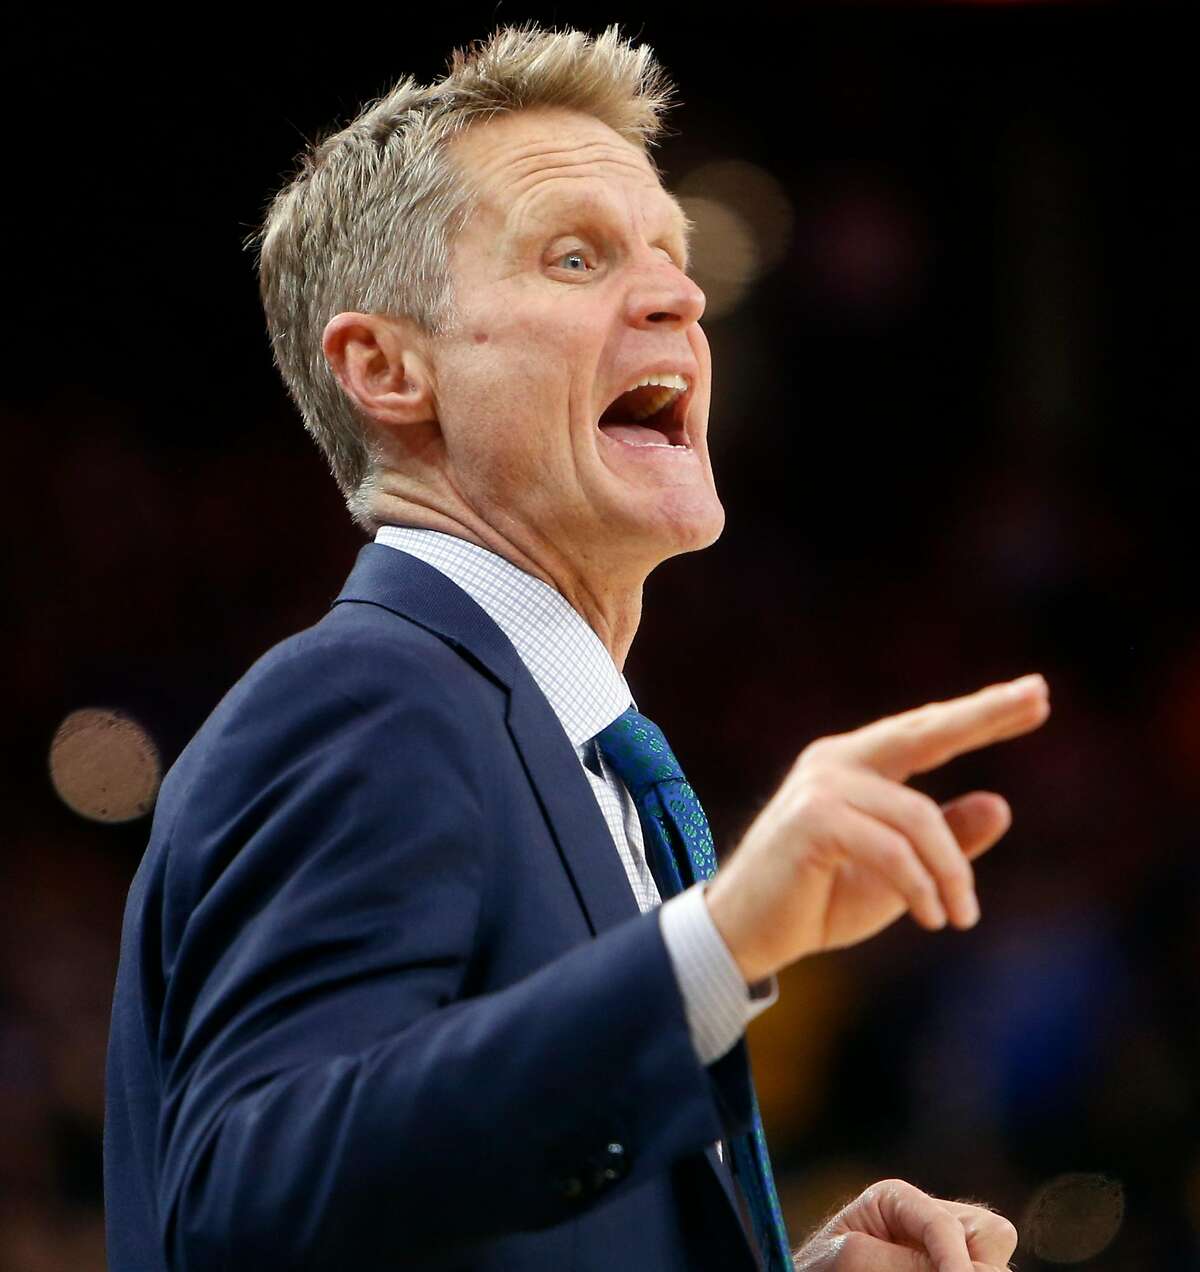 Golden State Warriors' head coach Steve Kerr in 3rd quarter against Portland Trail Blazers during NBA game at Oracle Arena in Oakland, Calif., on Wednesday, January 4, 2017.